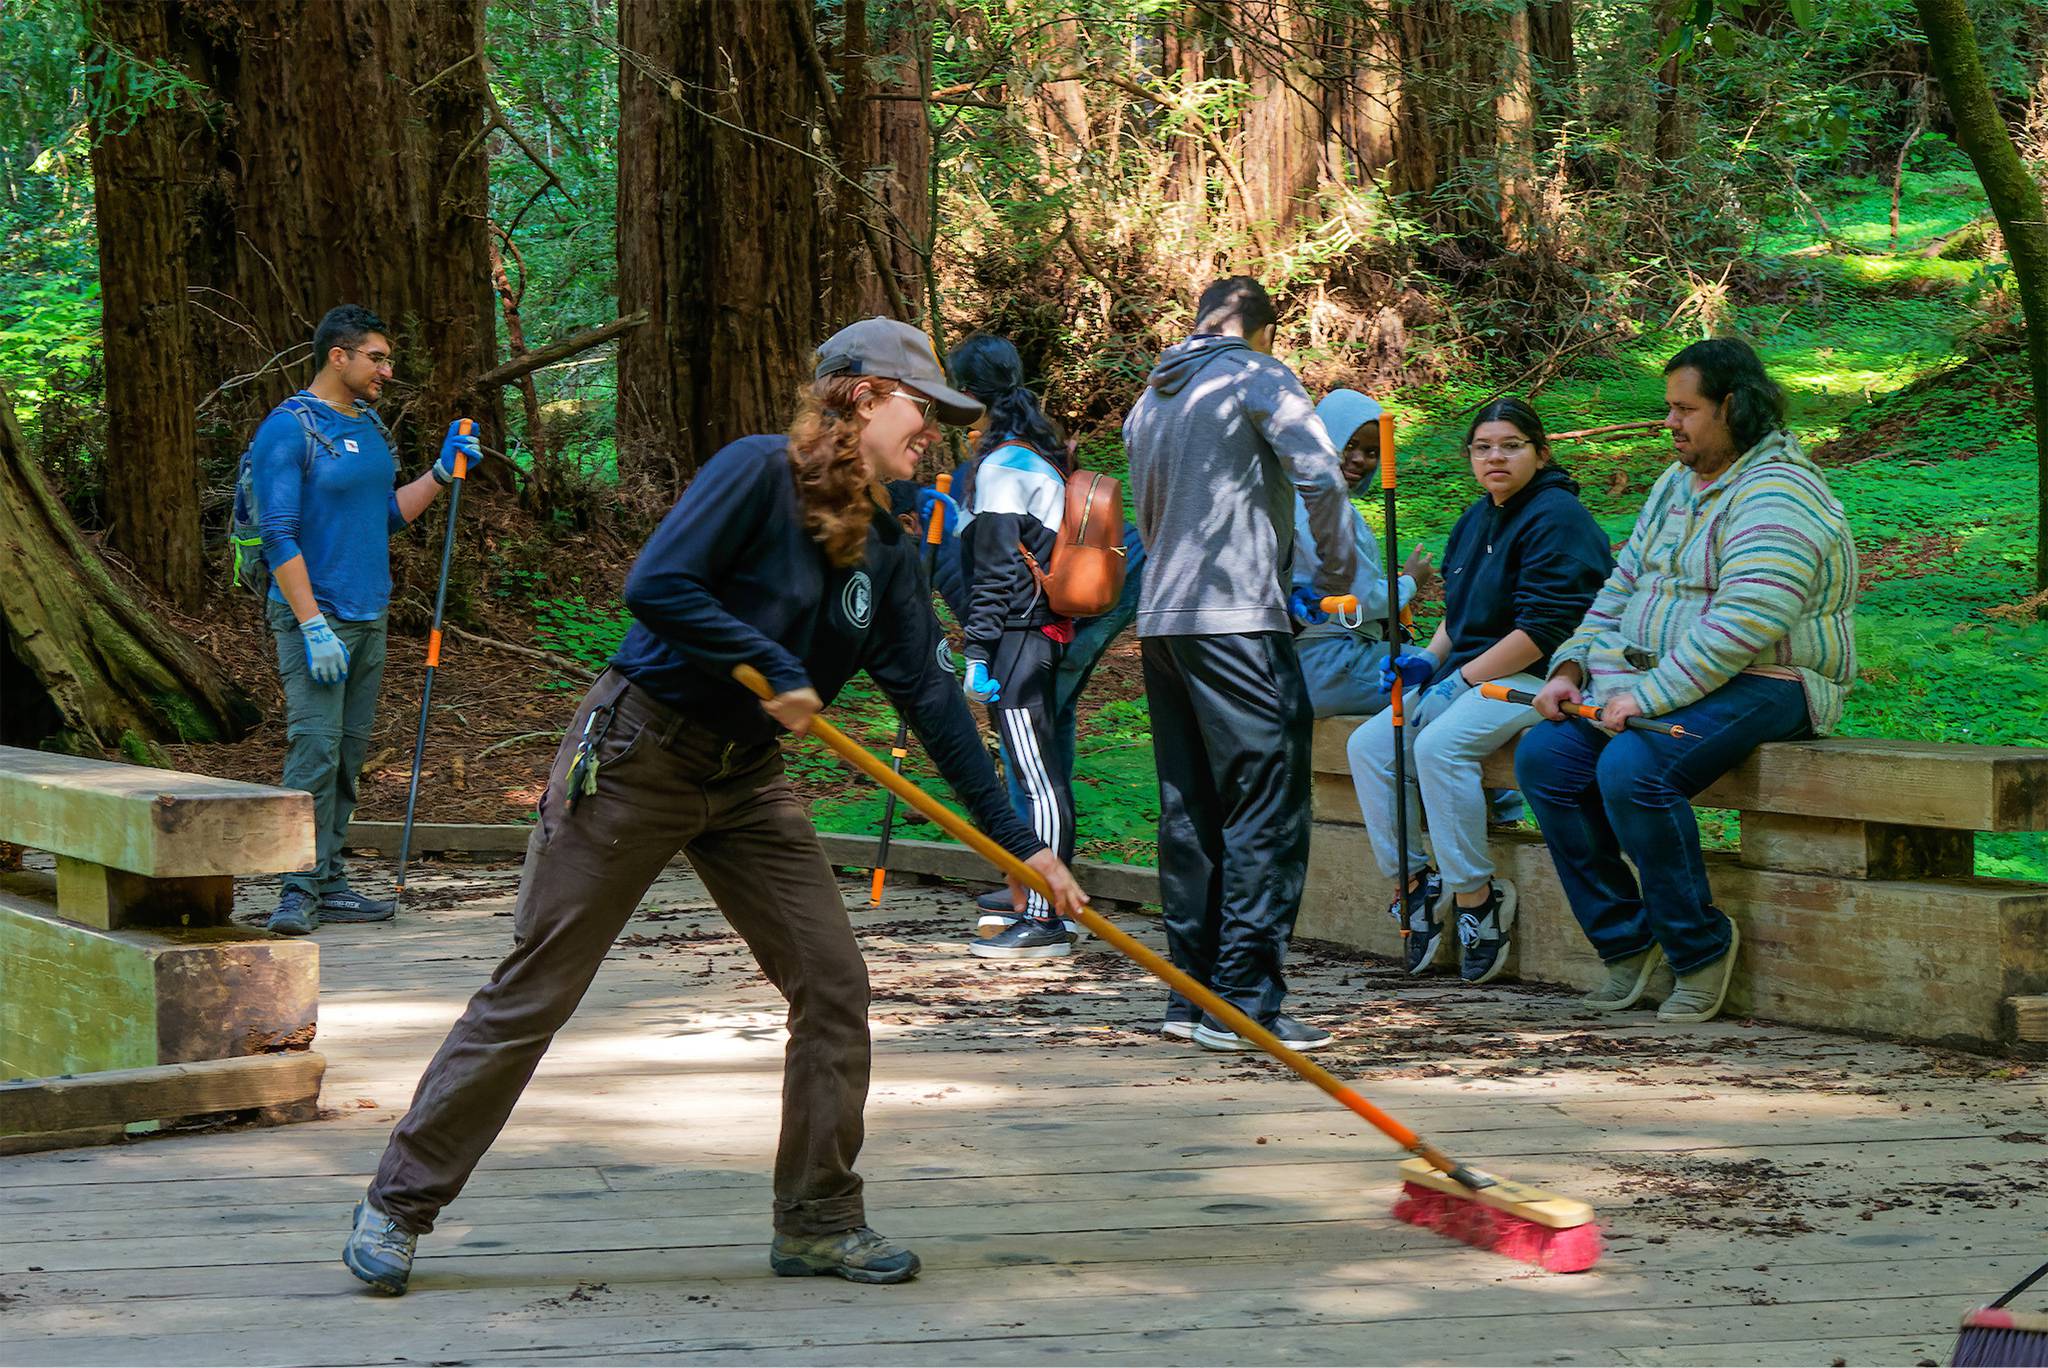 A female volunteer smiles as she sweeps a deck near redwood trees as other volunteers pause to sit on nearby benches